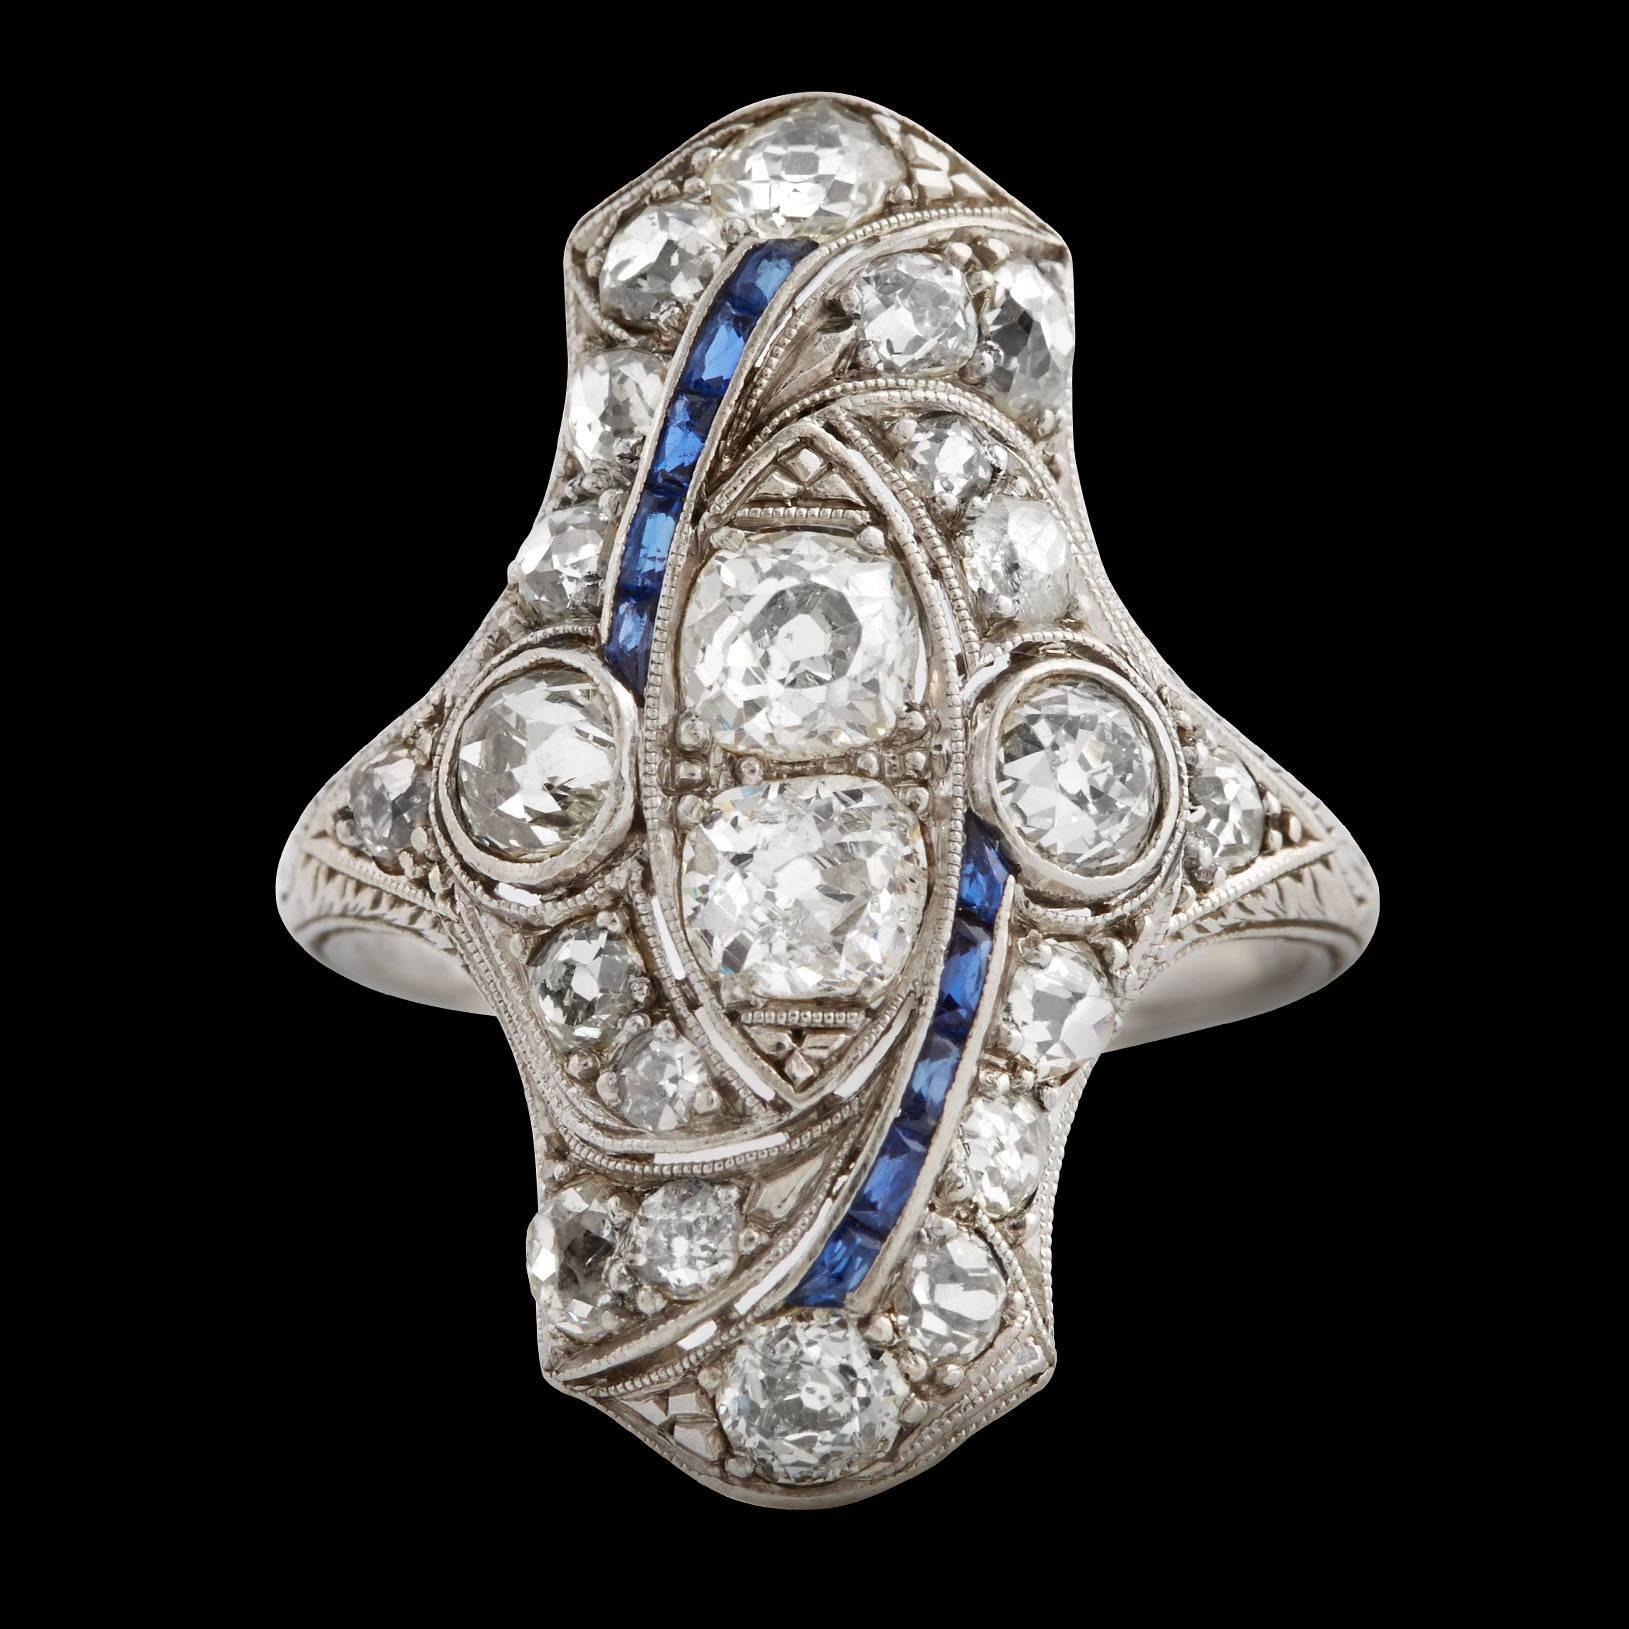 North to South Edwardian Platinum Diamond Ring features 22 Old Mine Cut Diamonds totaling approximately 2.00 carats & detailed with 10 rectangular cut Sapphires totaling approximately 0.50 carats. This Edwardian ring is estimated to be from the